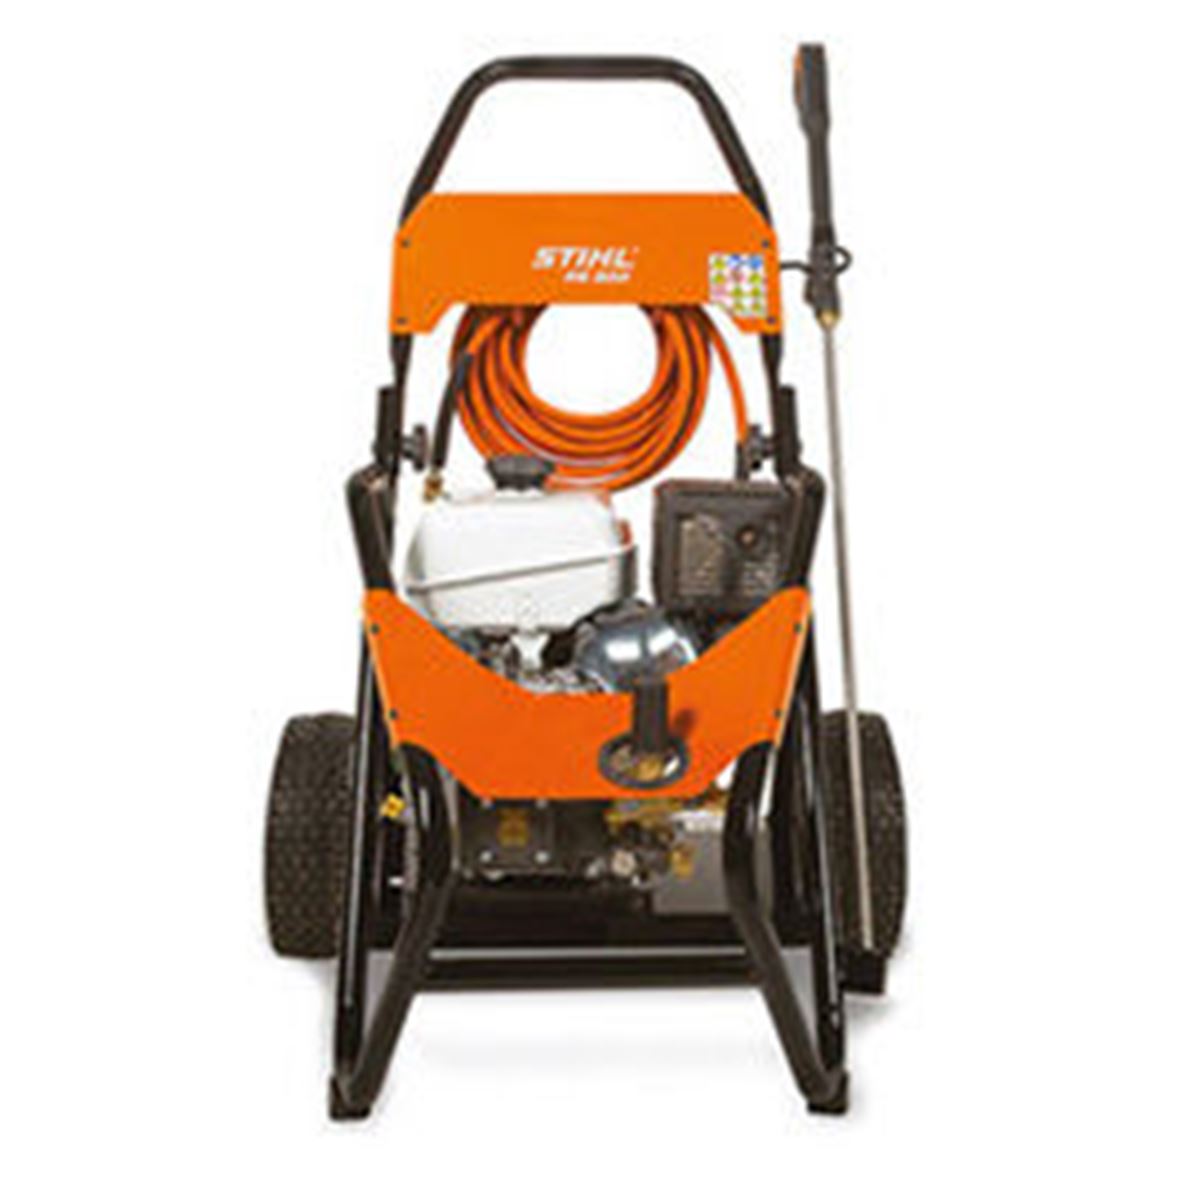 STIHL RB 800 Powerful 105 kW Petrol Pressure Washer for professional users